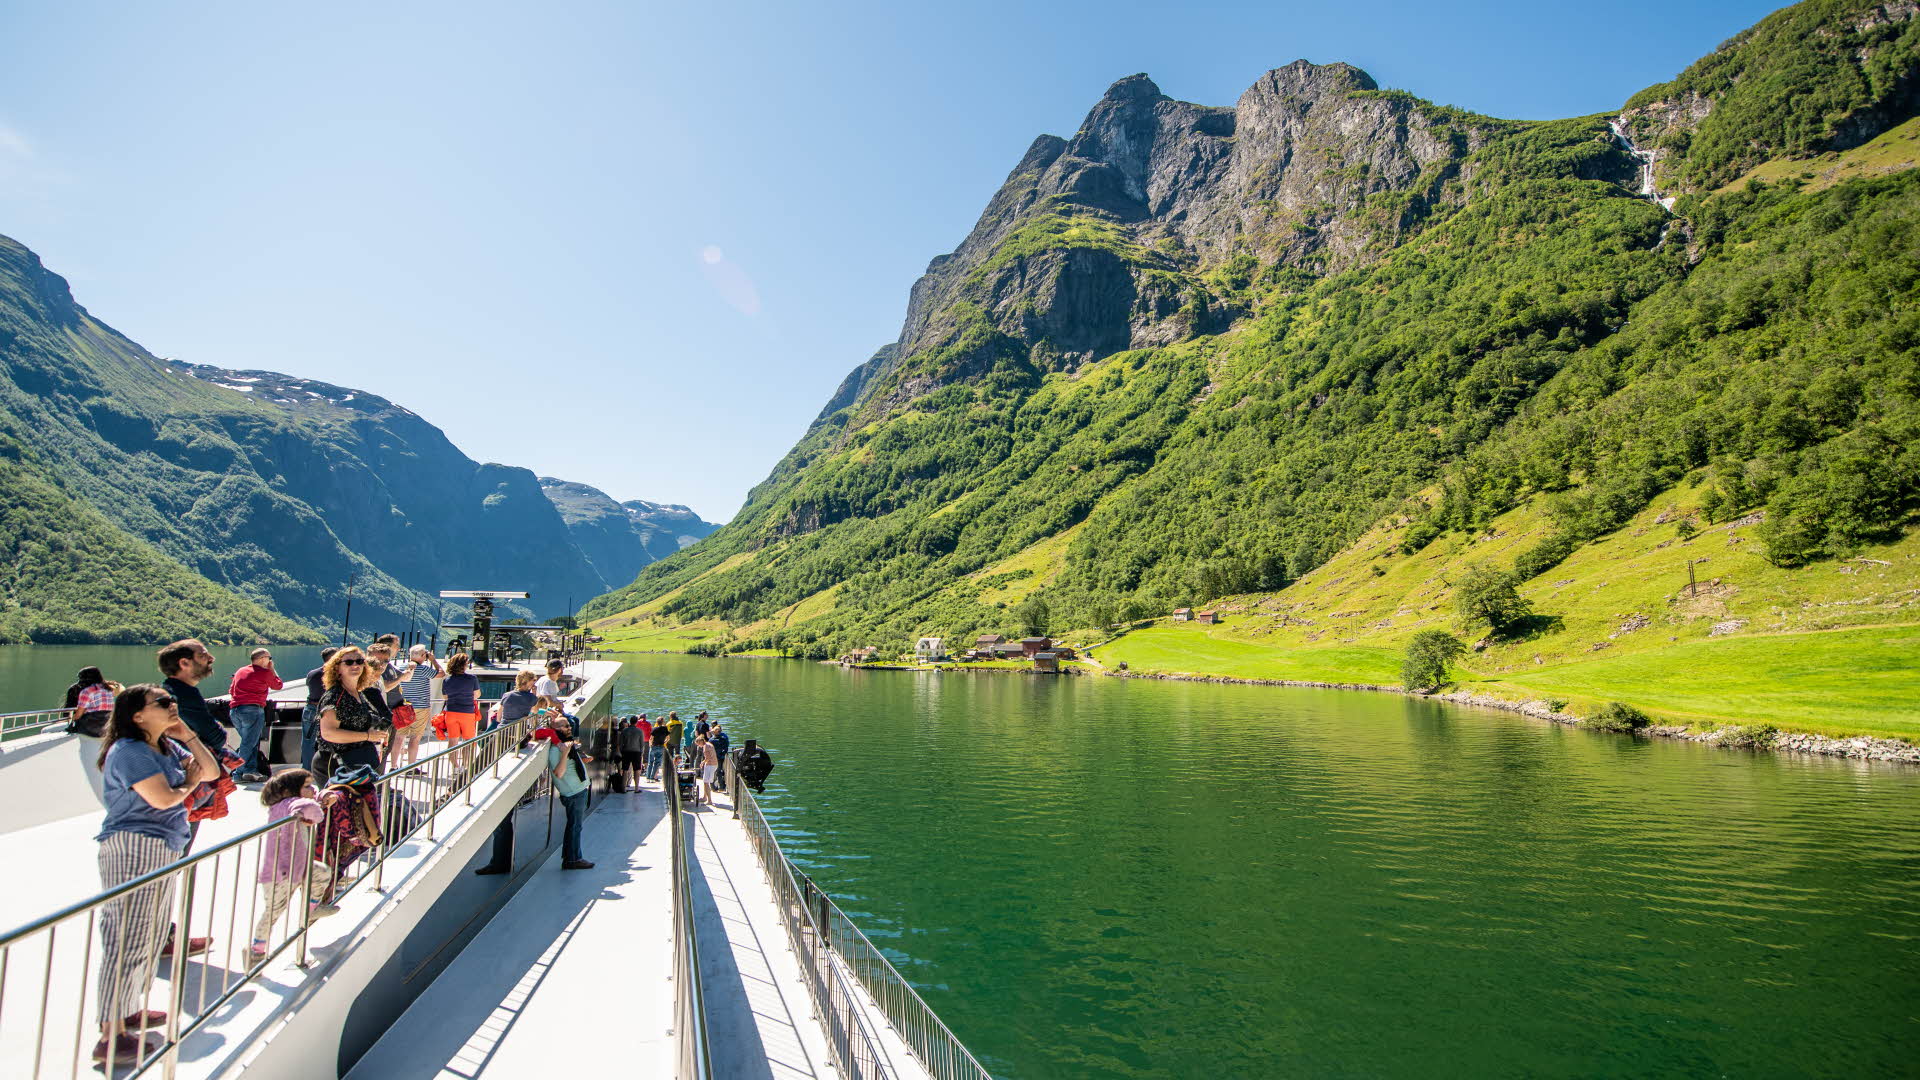 People standing on a roof deck cruising on the Nærøyfjord surrounded by steep, green mountains.